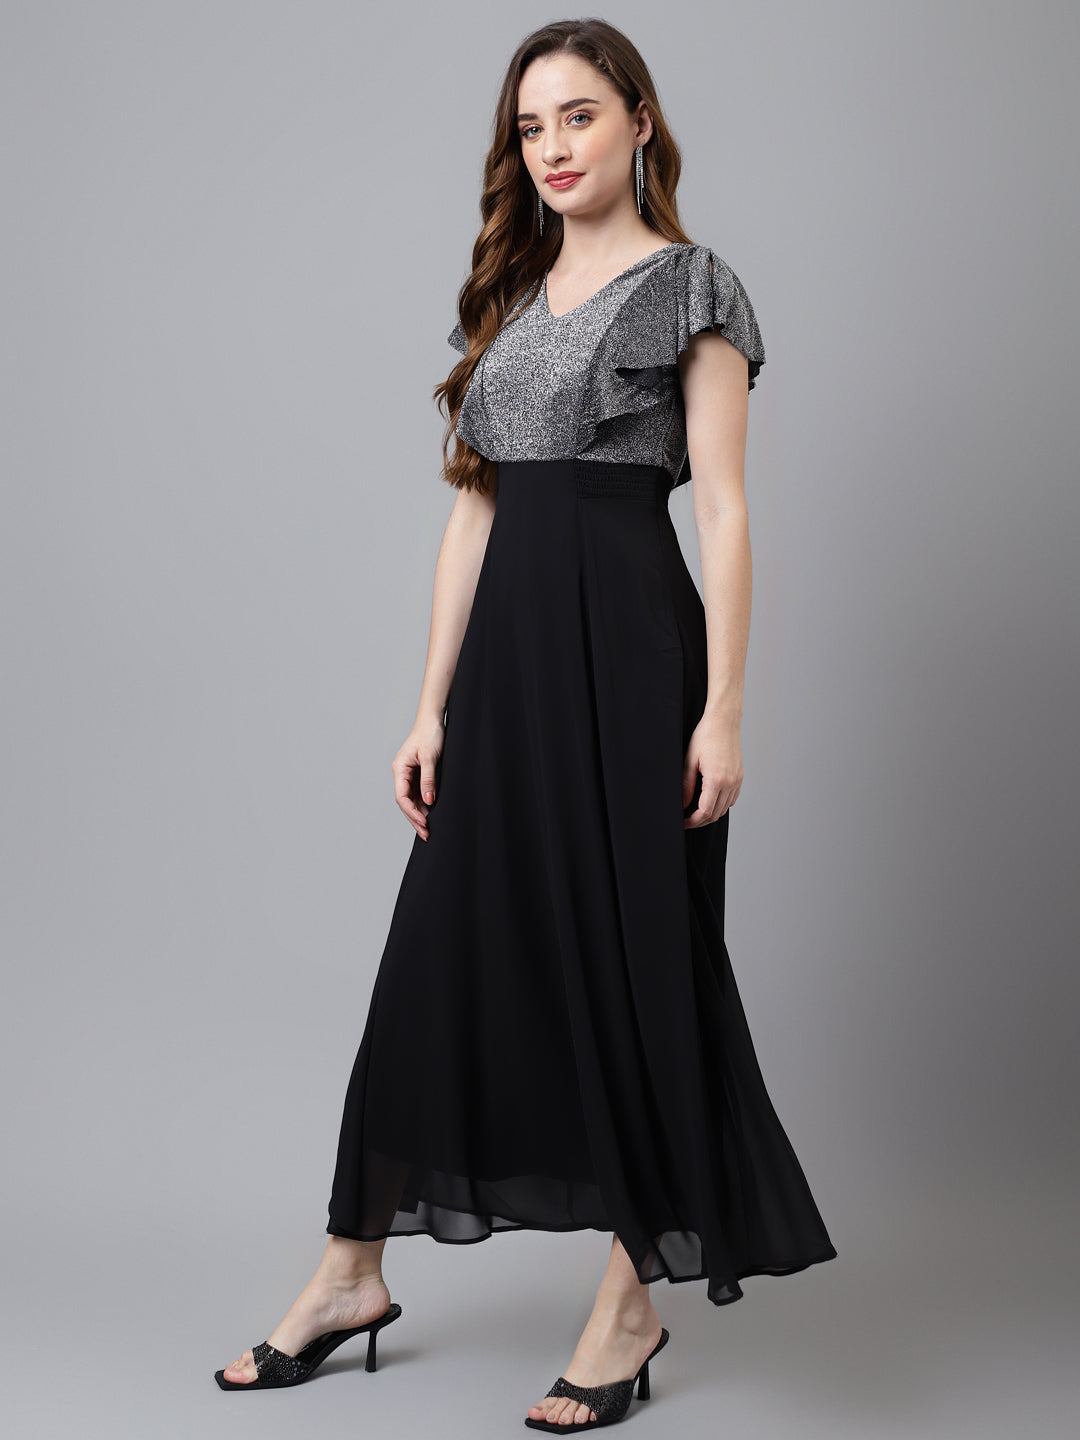 Black Cap Sleeve V-Neck Solid Women Maxi Dress for Party